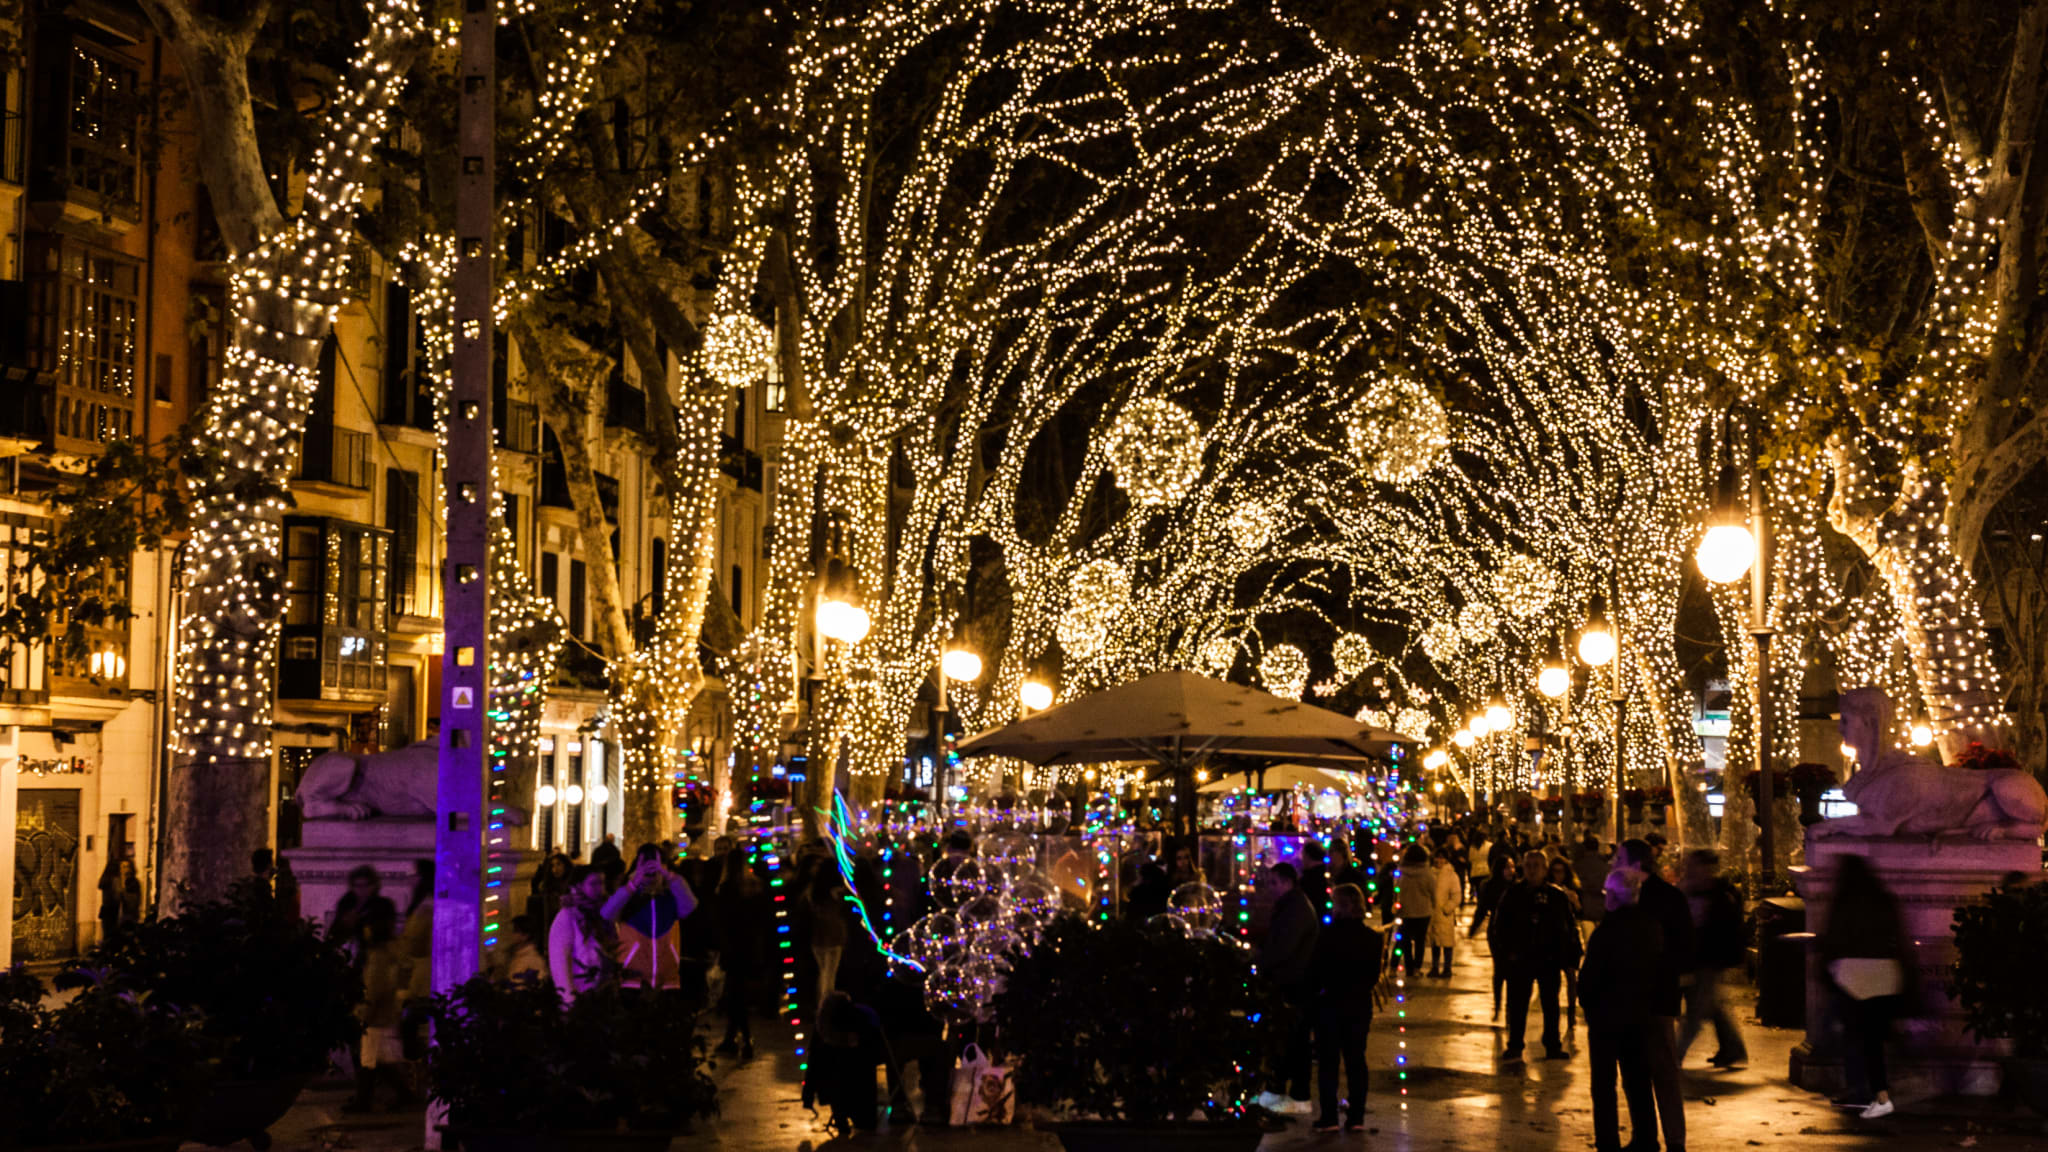 Weihnachtsbeleuchtung am Passeig del Born©/ Jeanne Emmel/ iStock Editorial / Getty Images Plus/ via Getty Images